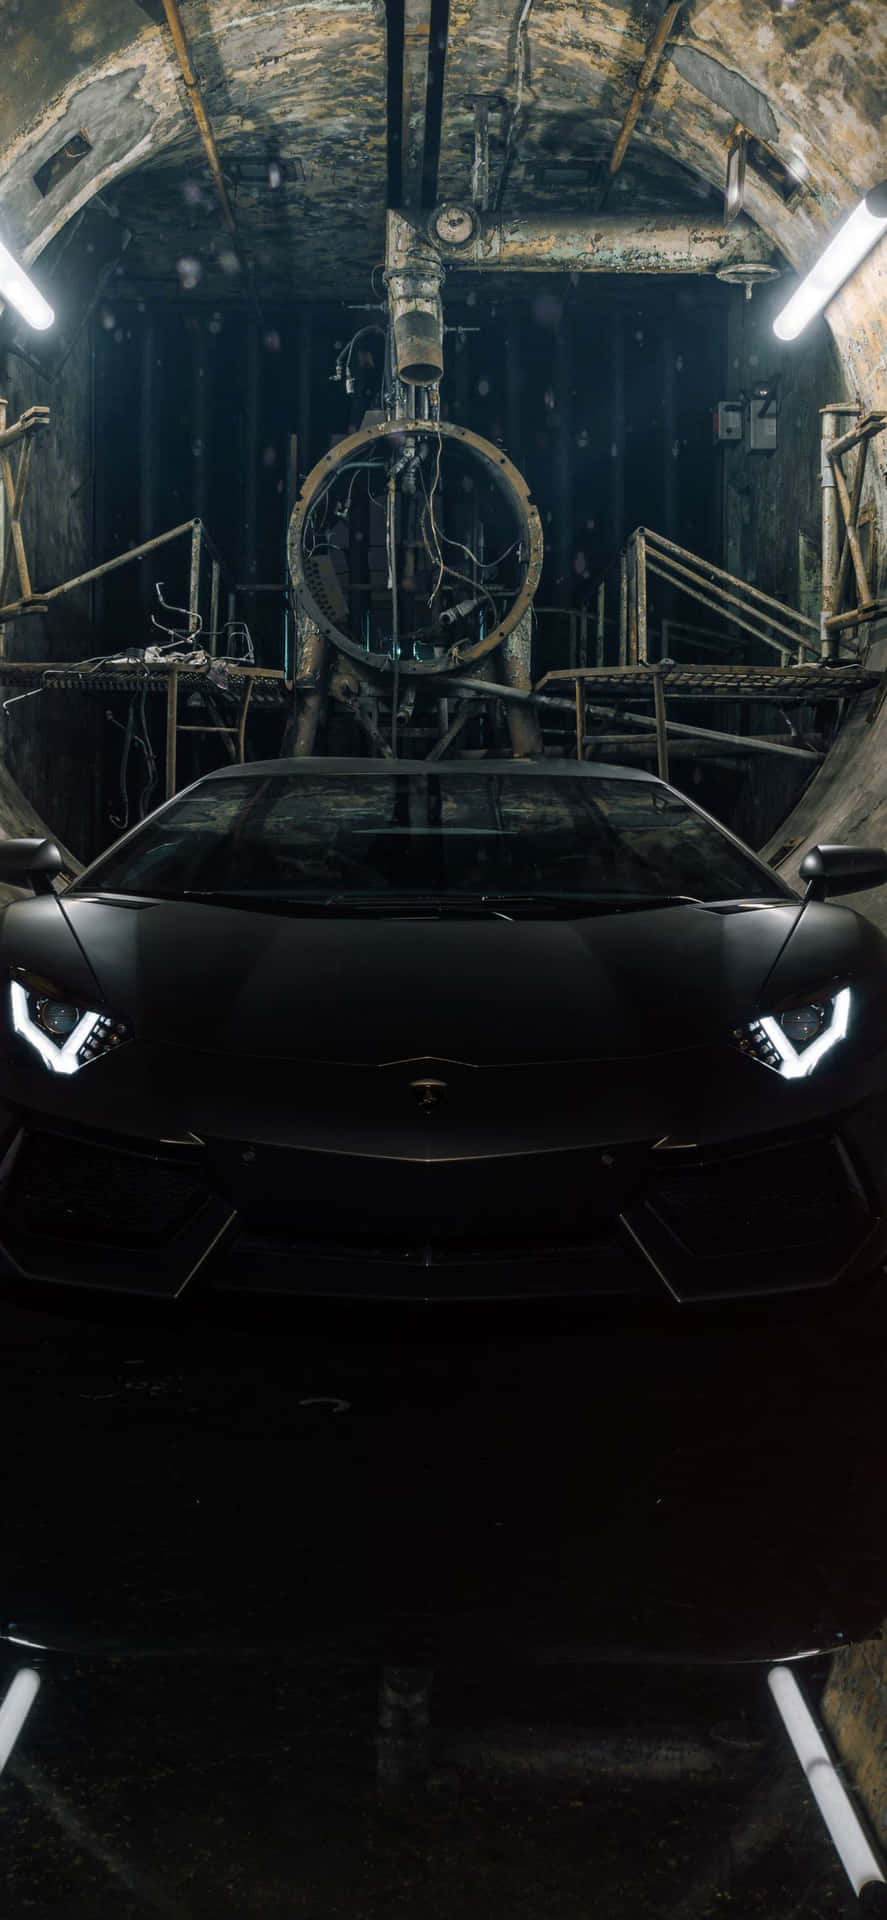 A Black Sports Car Is Parked In A Dark Tunnel Wallpaper